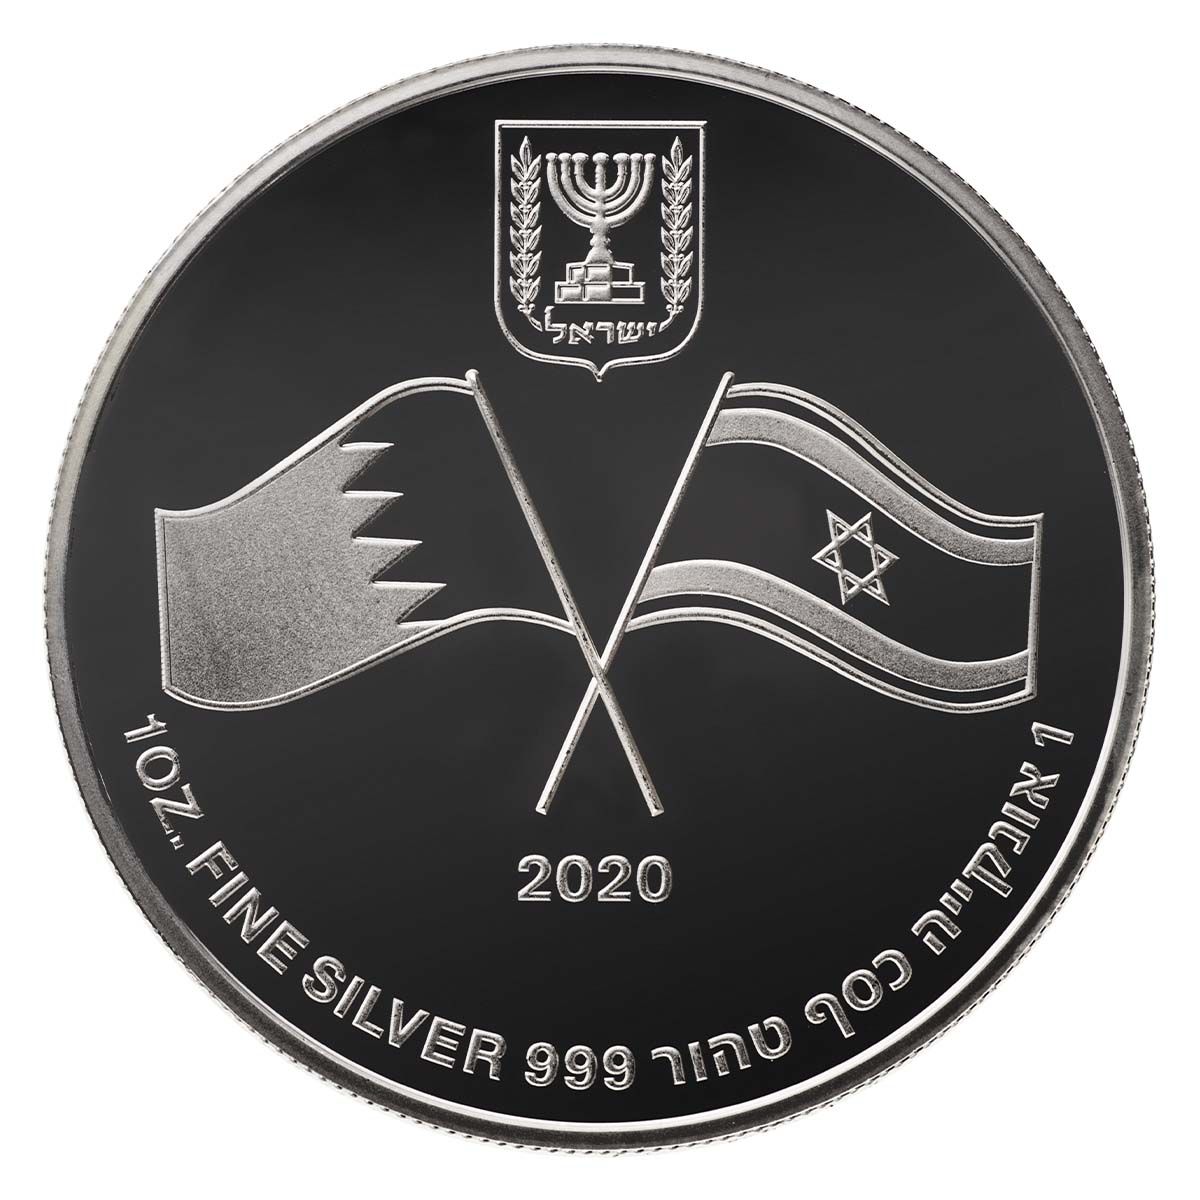 Picture of State of Israel Coins 231825311 1 oz 999 Israel Bahrain Peace Agreement Silver Coin